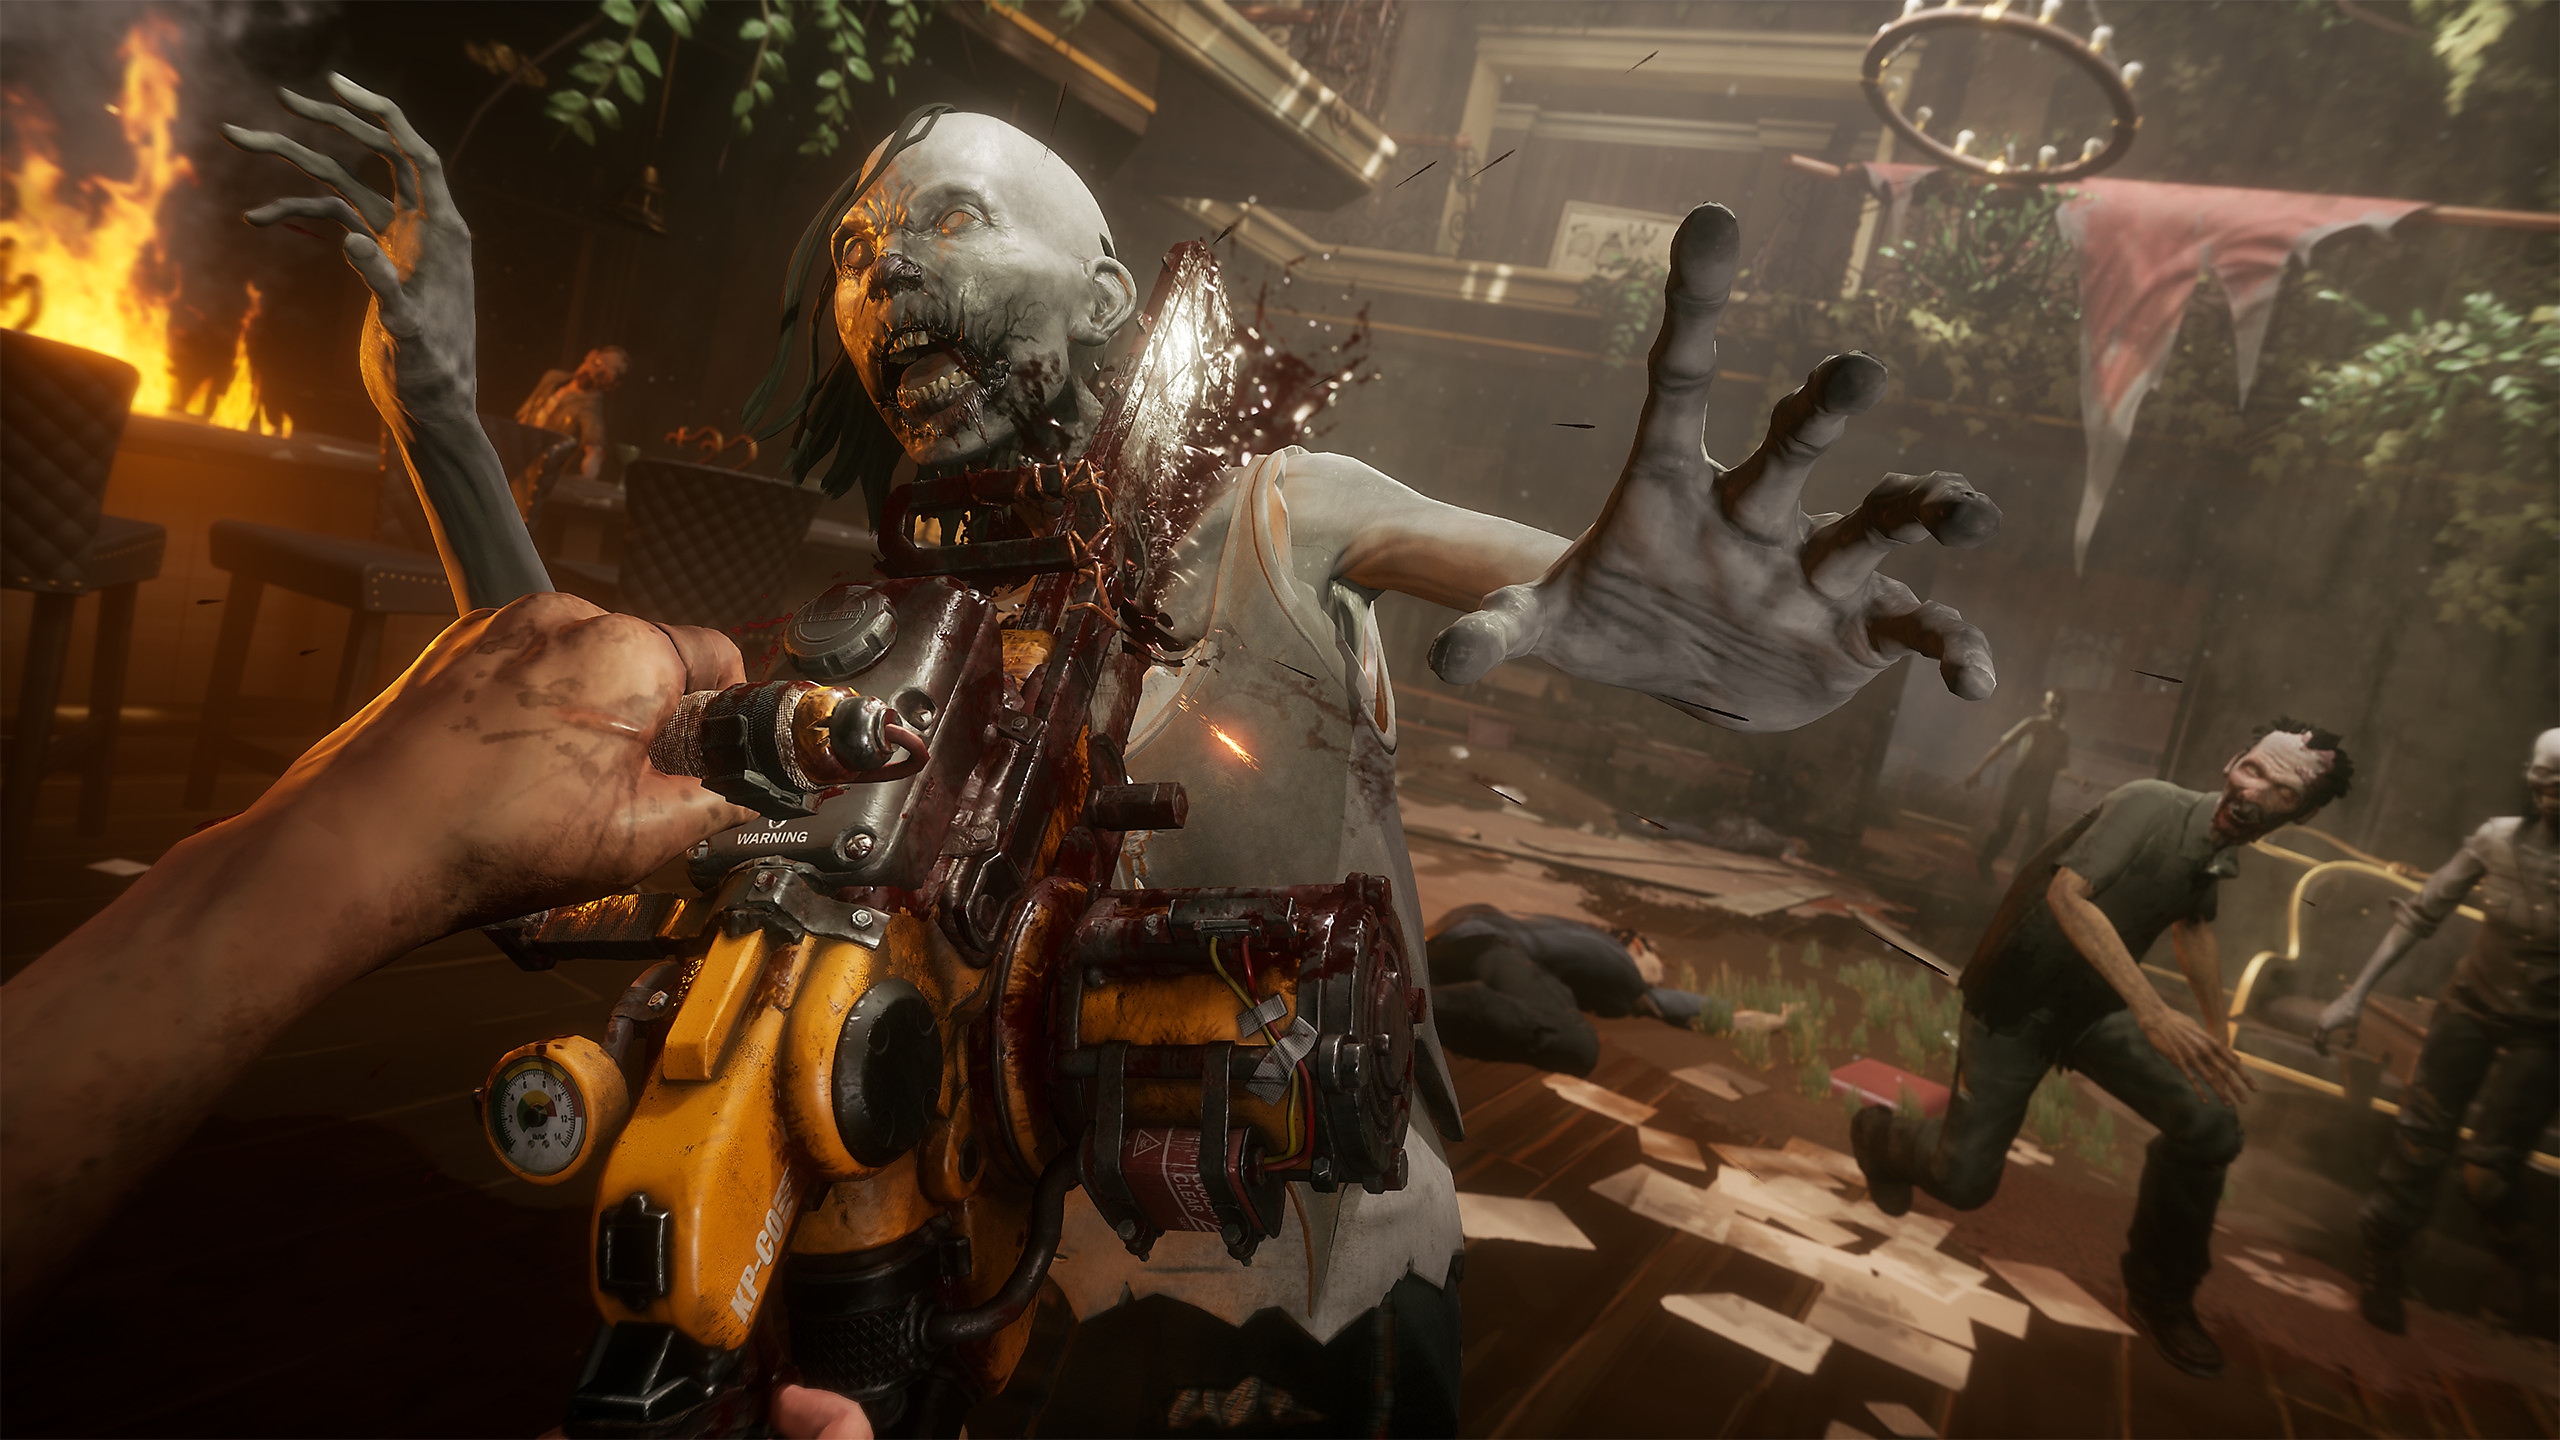 TWDSS Chapter 2 Retribution screenshot showing a zombie being killed with a chainsaw